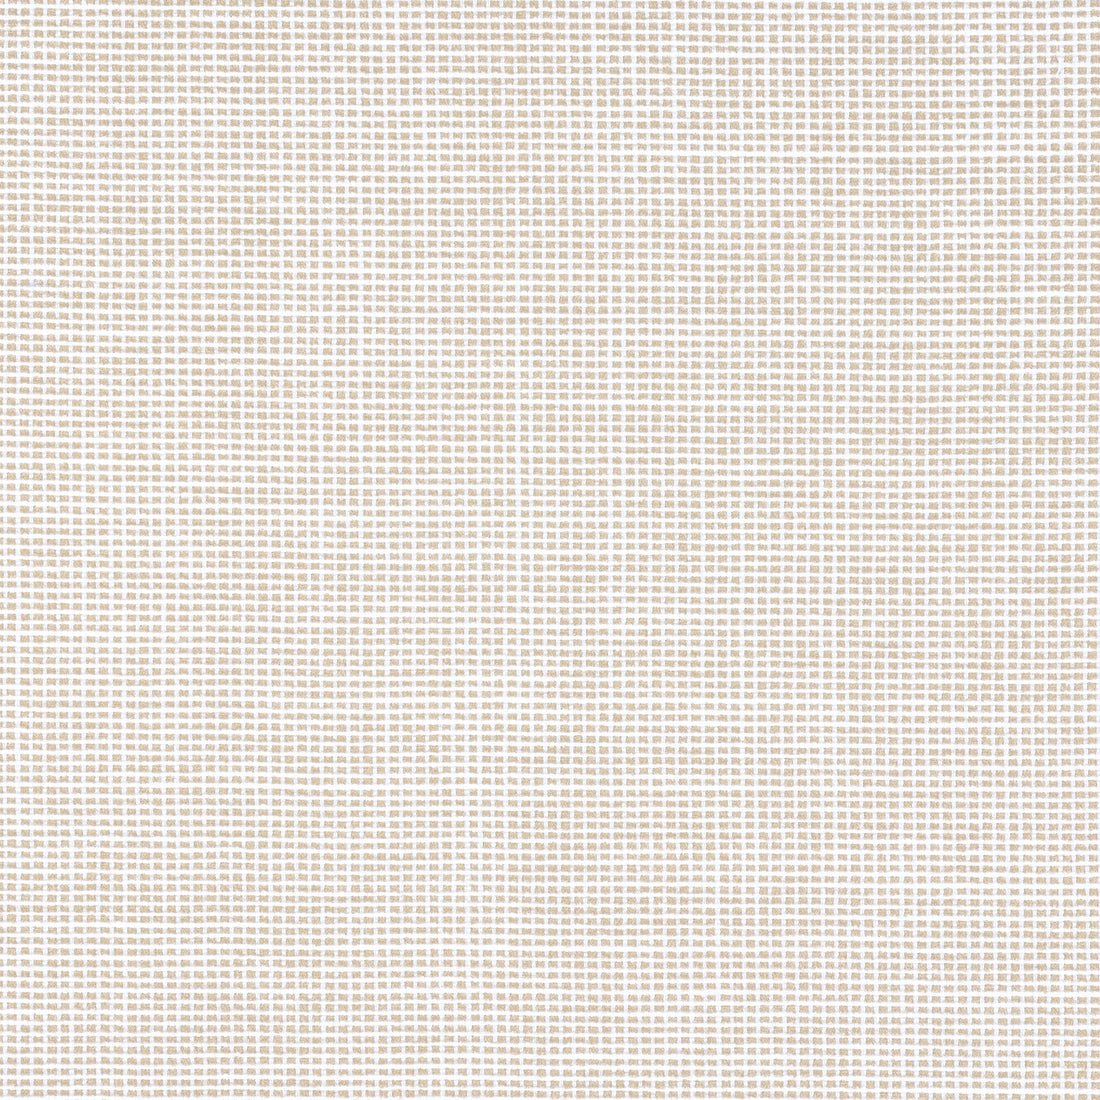 Isla fabric in sand color - pattern number W8567 - by Thibaut in the Villa Textures collection